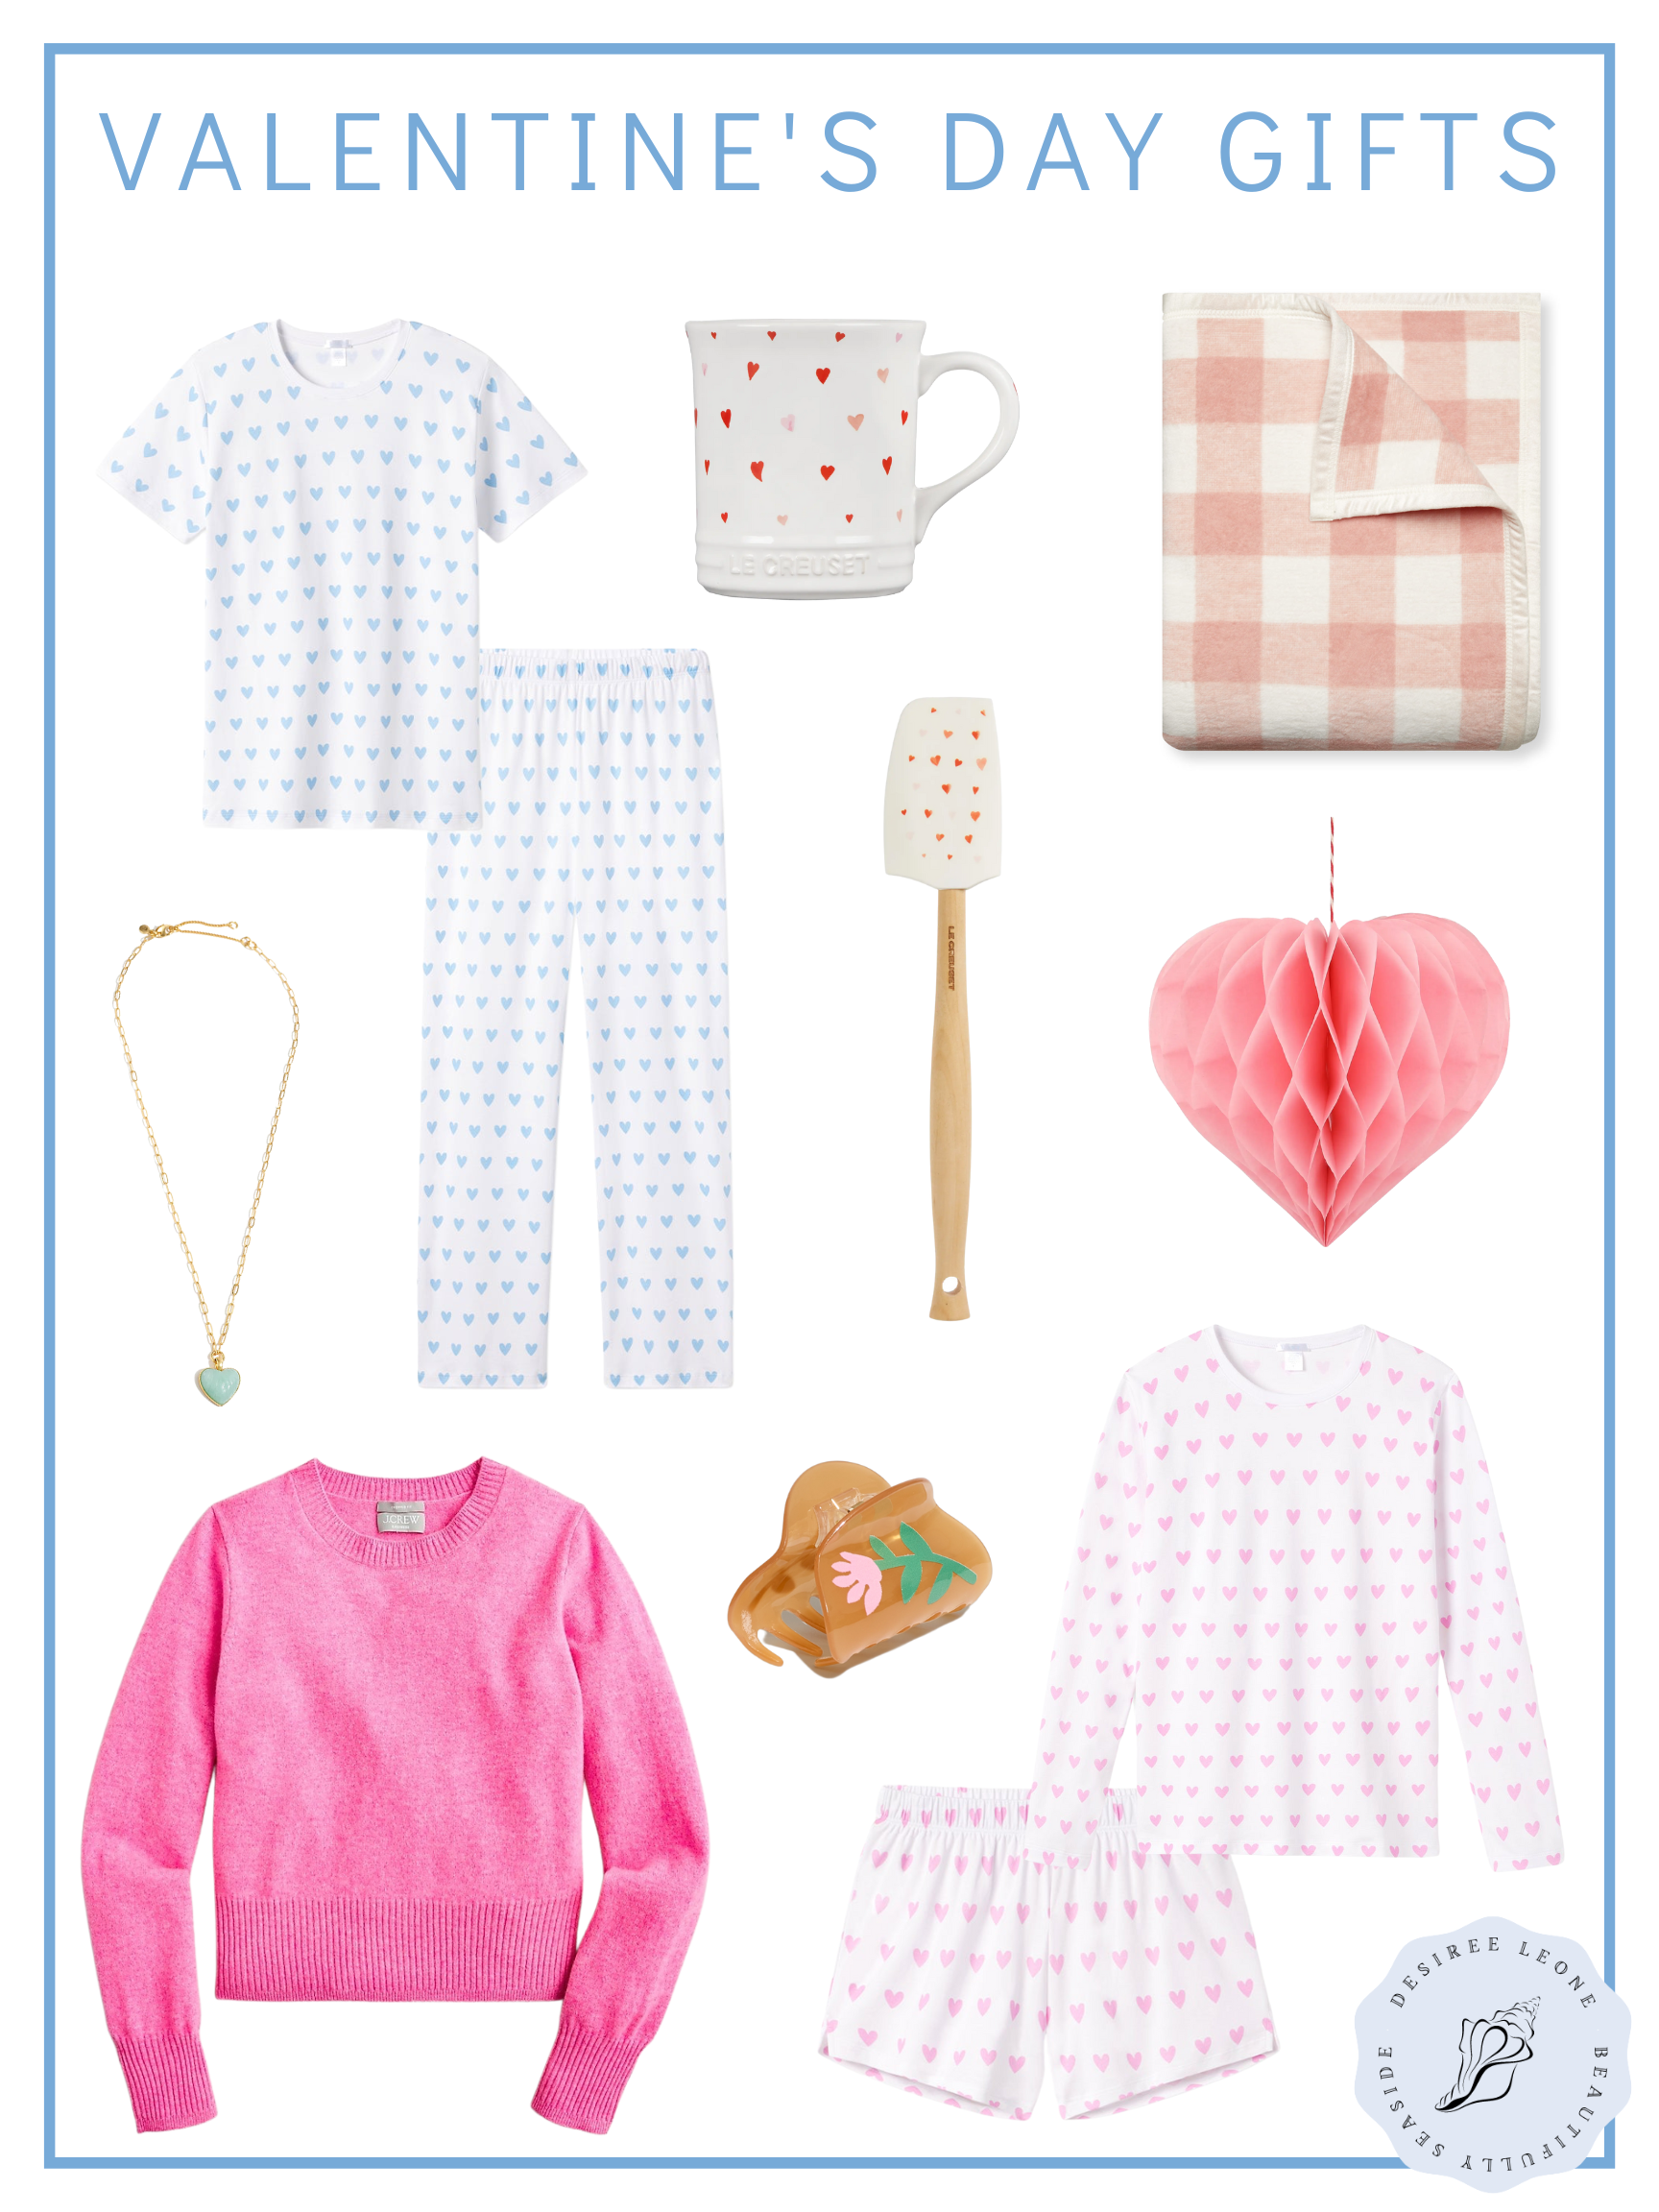 Desiree Leone of Beautifully Seaside shares 30 cute Valentine's Day Gift ideas to give the girls this year.